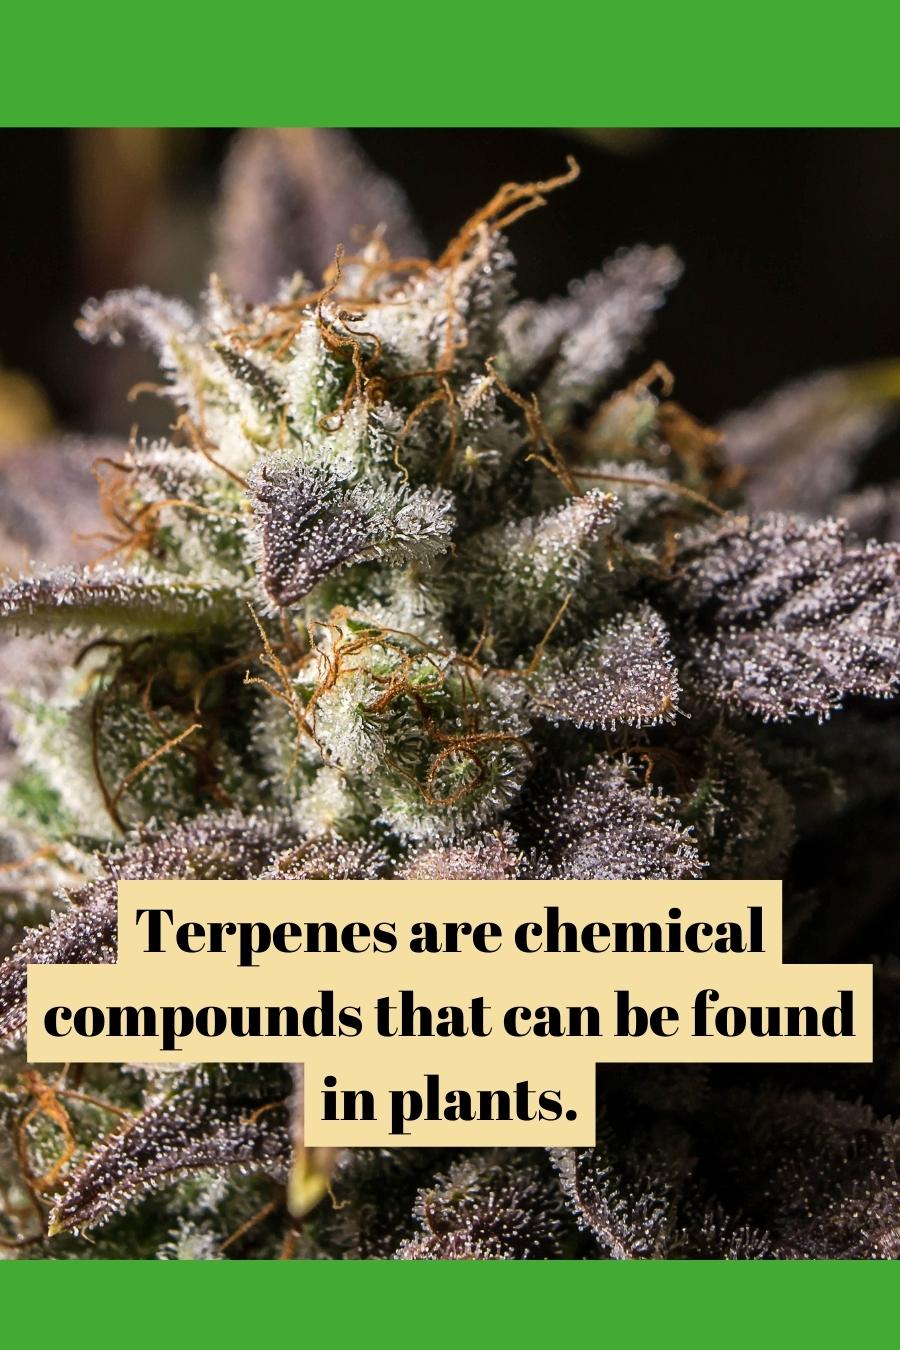 Terpenes are chemical compounds that can be found in plants.